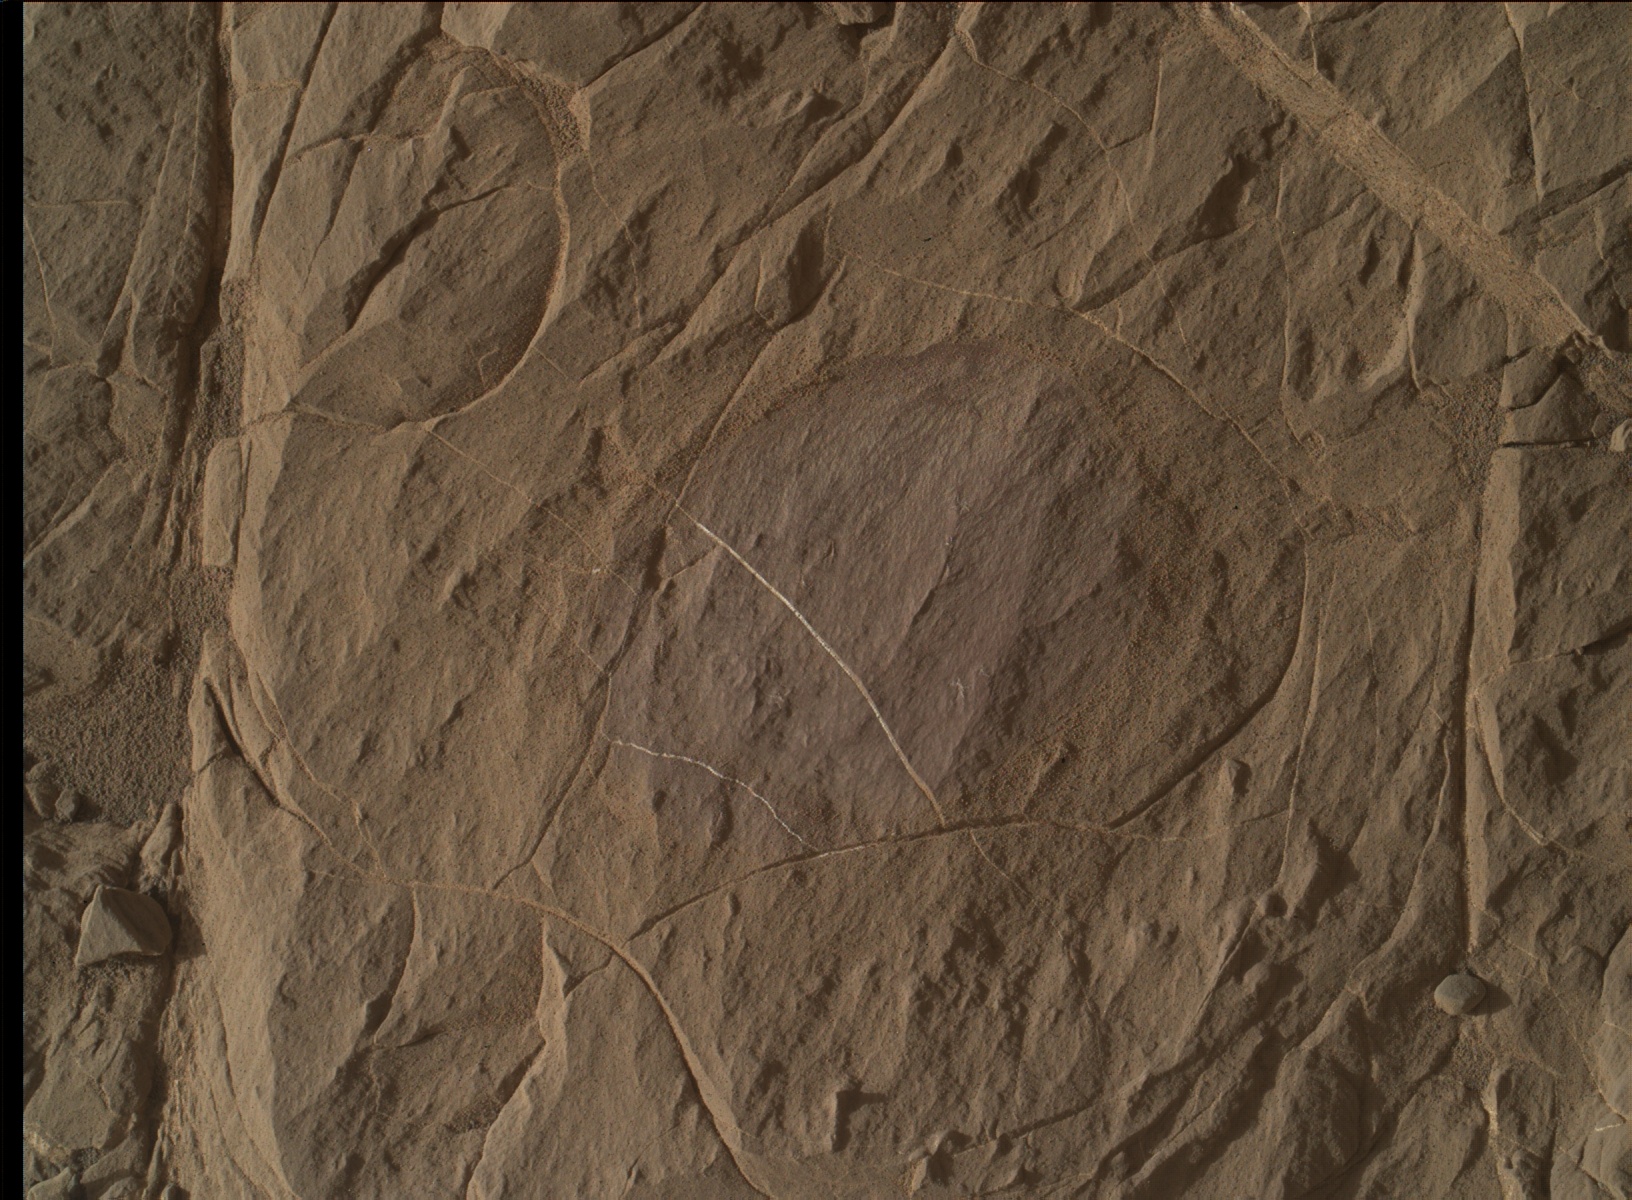 Nasa's Mars rover Curiosity acquired this image using its Mars Hand Lens Imager (MAHLI) on Sol 1863